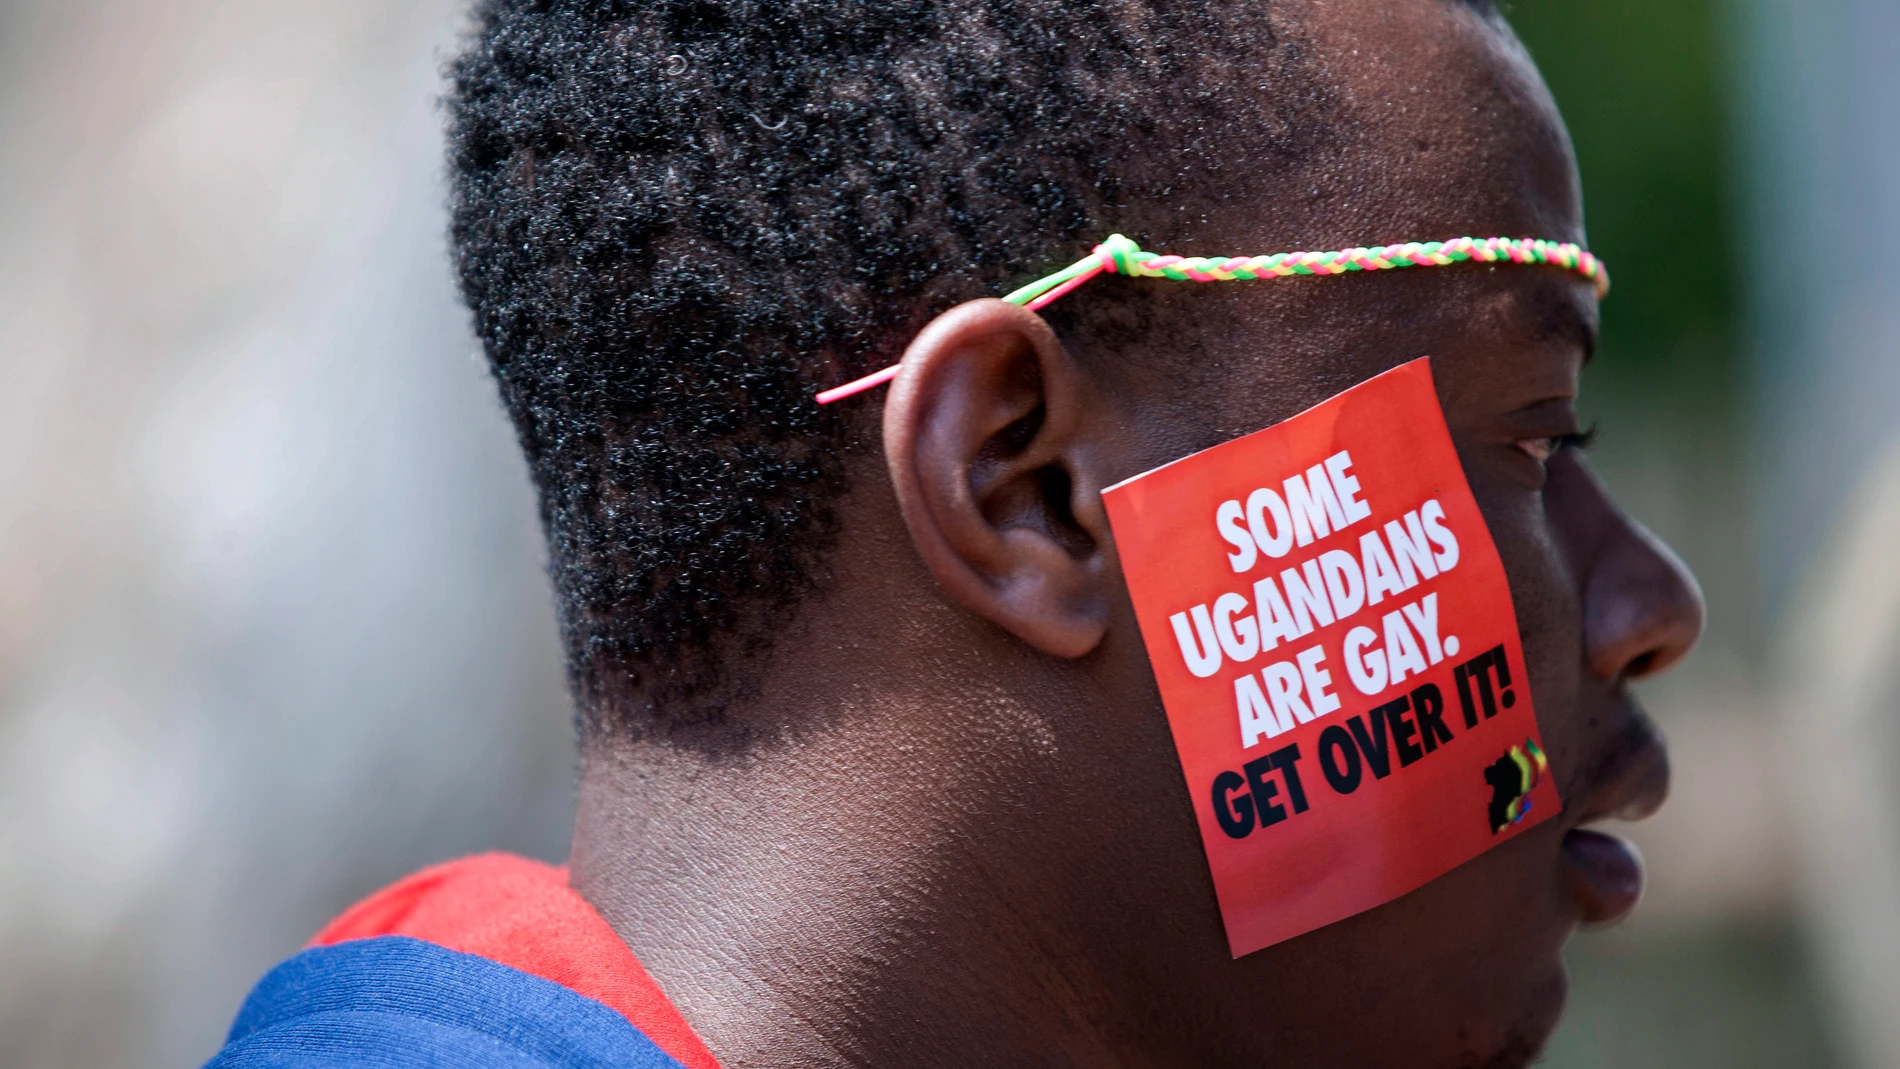 FILE - A man is seen during the third Annual Lesbian, Gay, Bisexual and Transgender (LGBT) Pride celebrations in Entebbe, Uganda on Aug. 9, 2014. Ugandan authorities have charged a man with aggravated homosexuality it was announced Tuesday, Aug, 29, 2023, which carries a possible death sentence. He is the first suspect to face the charge since the enactment in May of an anti-gay law condemned by critics as draconian. (AP Photo/Rebecca Vassie, file)